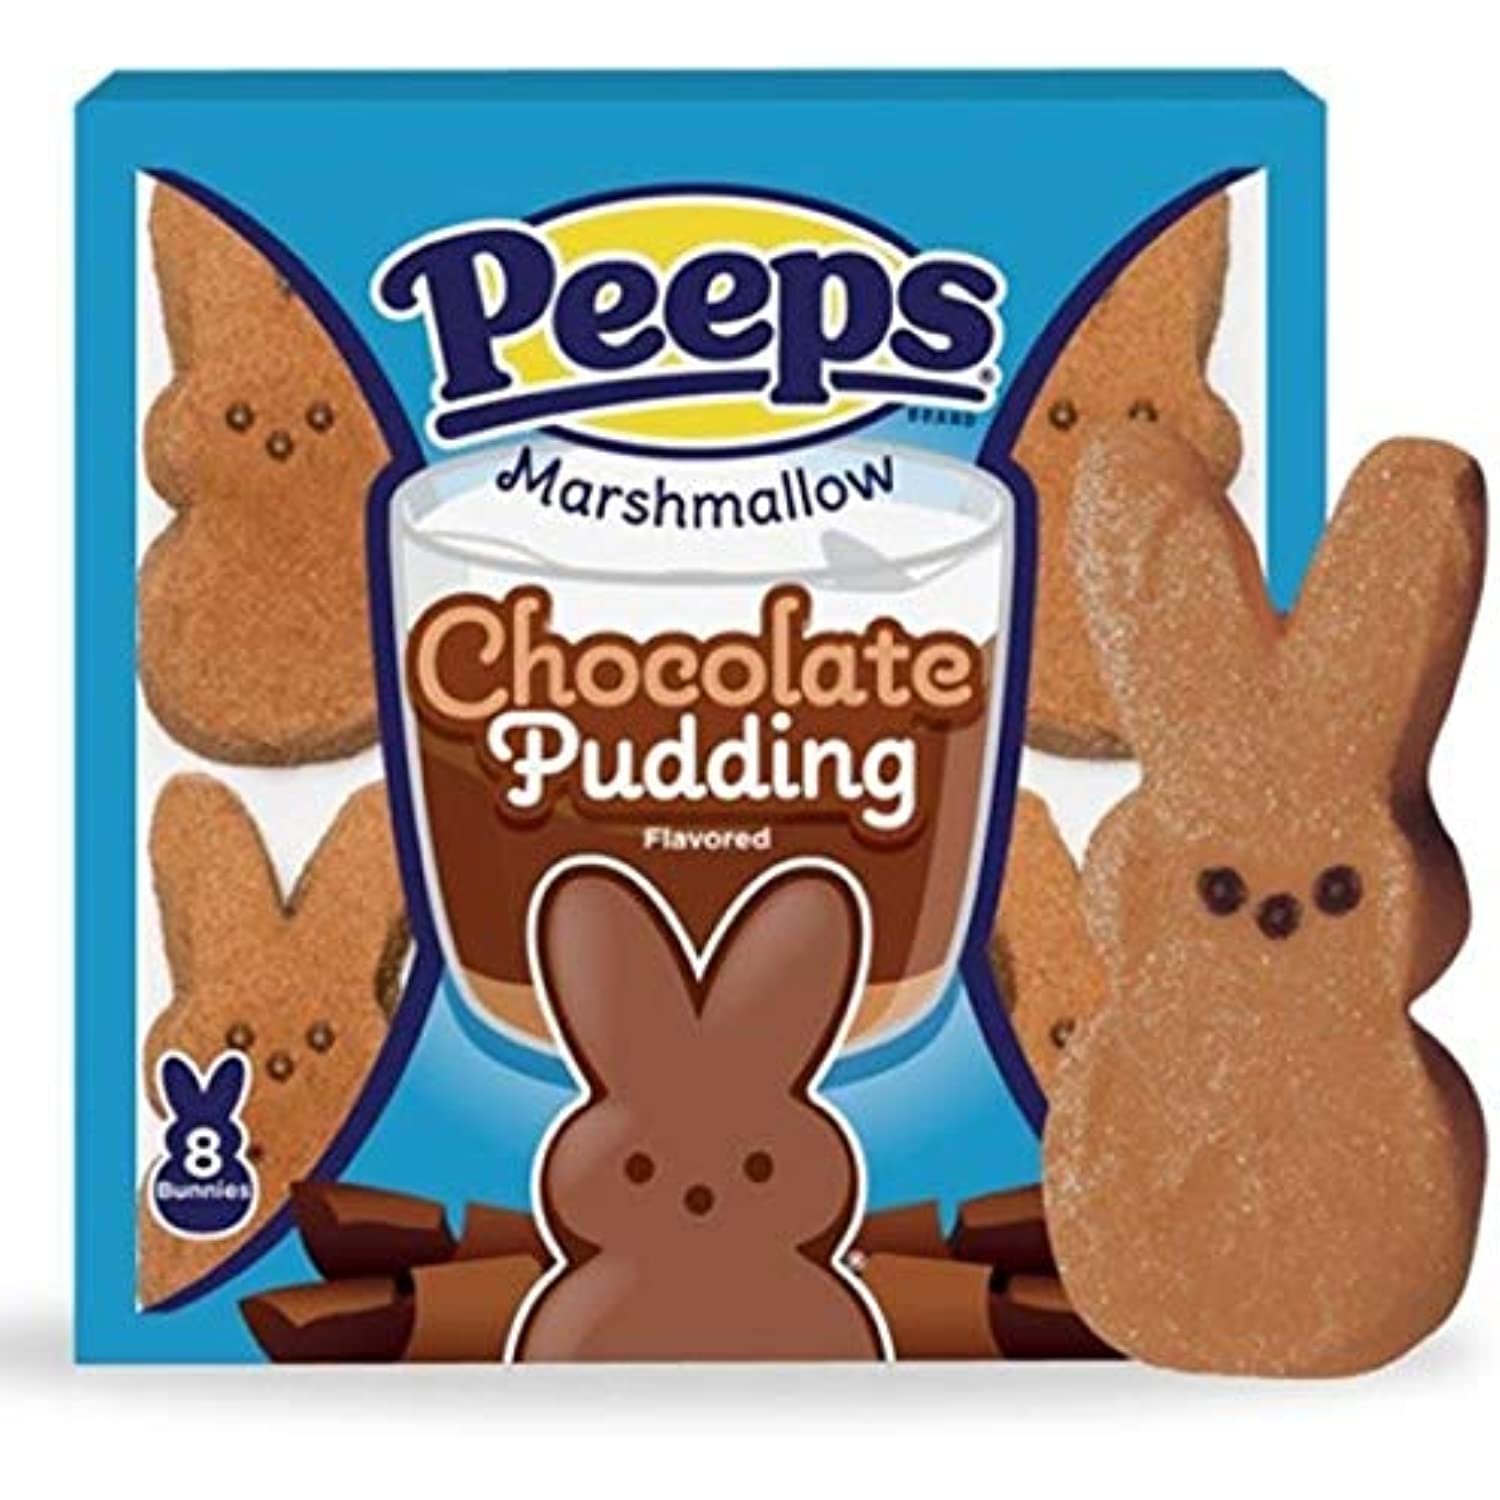 Easter Peeps Marshmallow Chocolate Pudding Bunny Candy Basket Stuffers, 3 Ounce